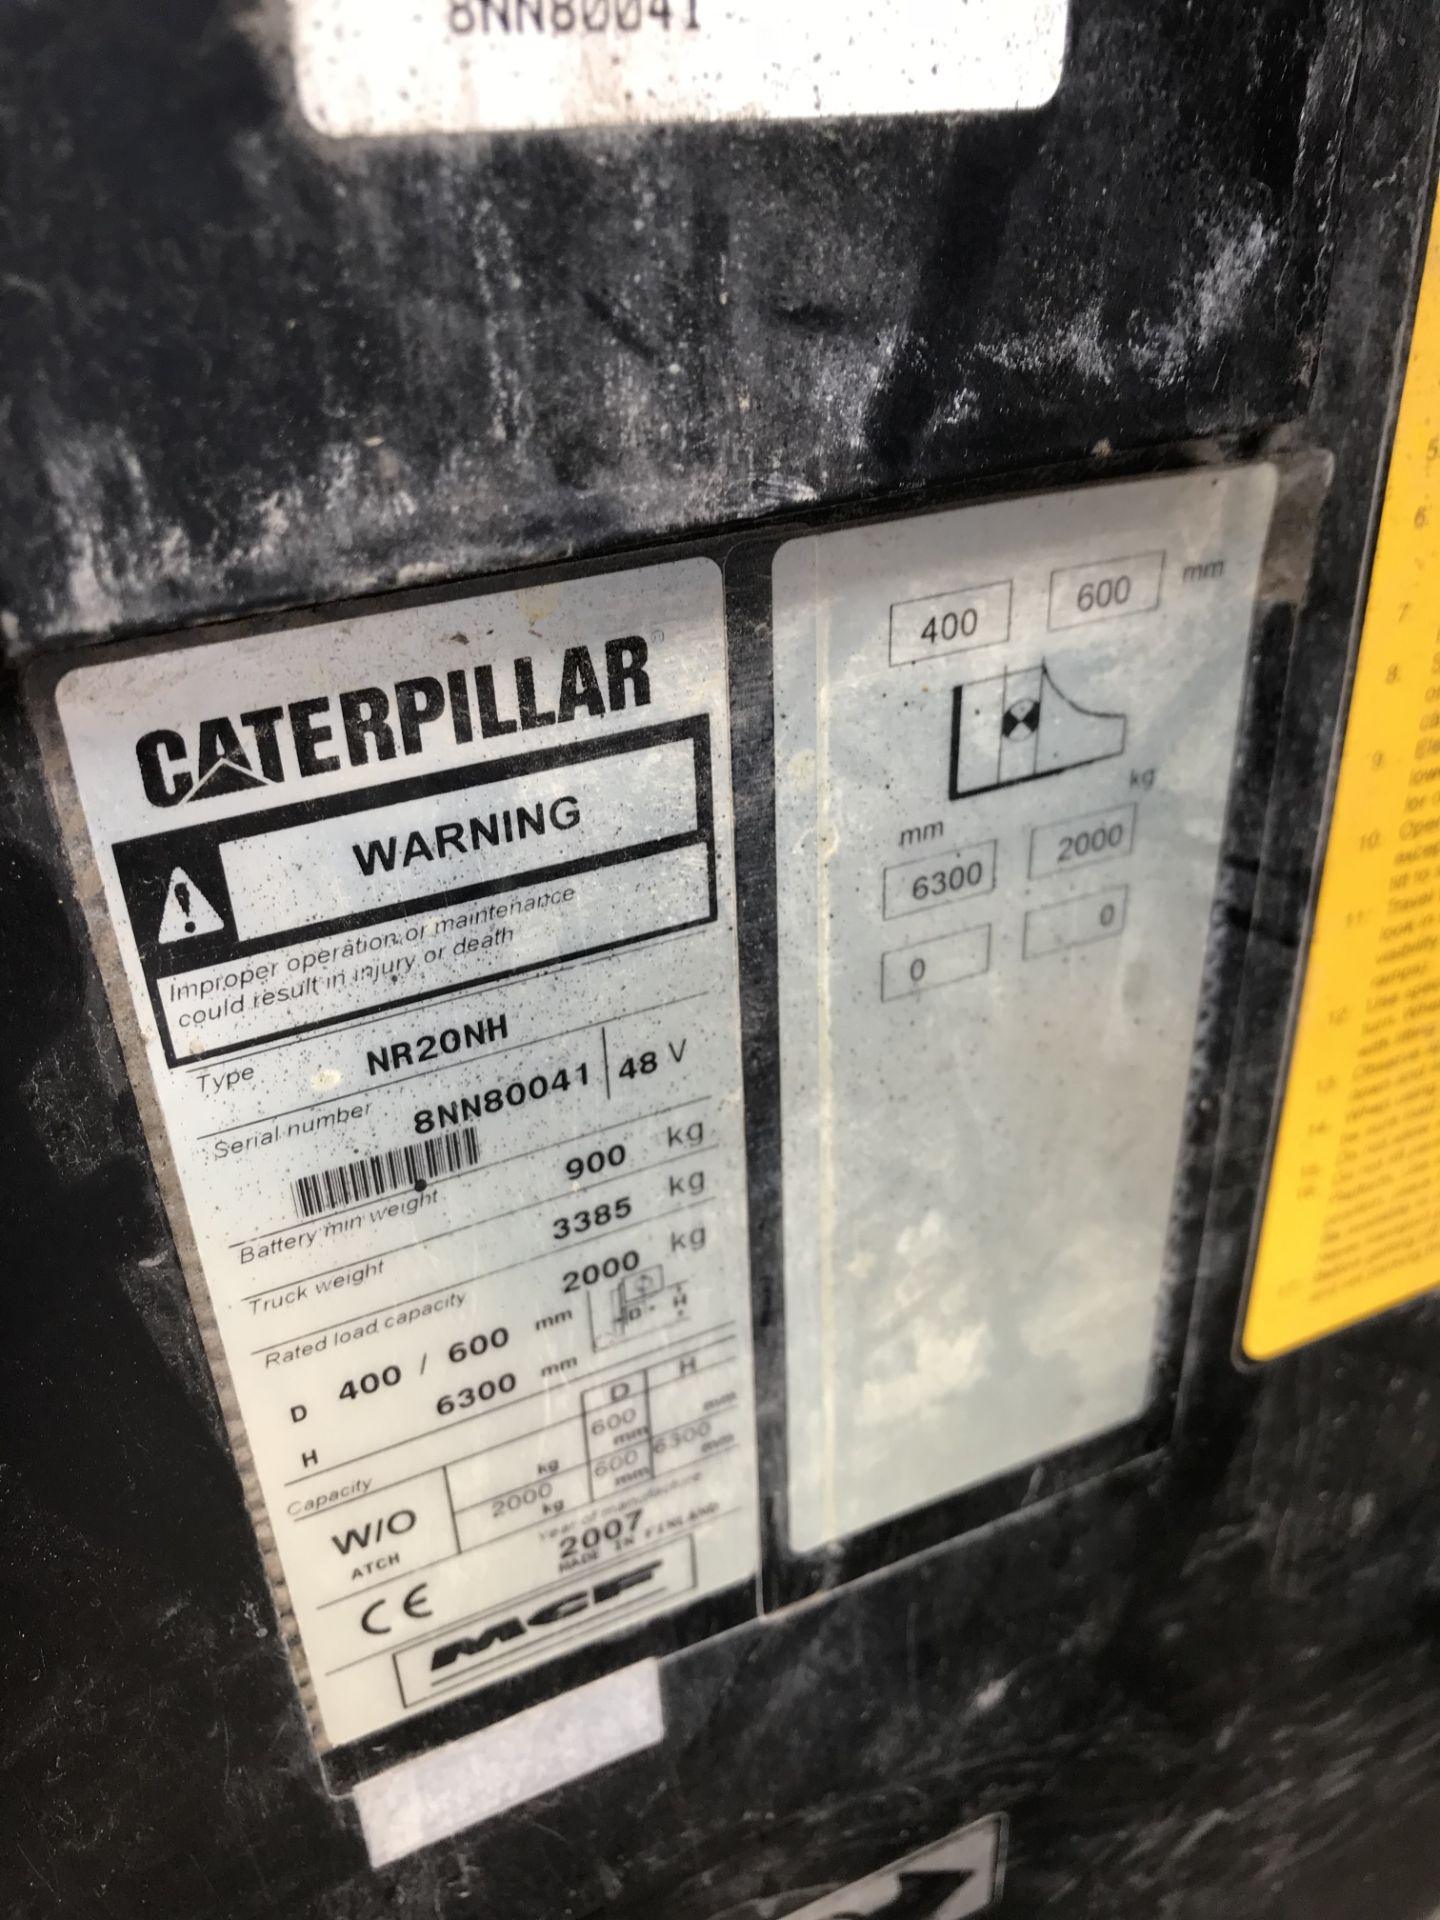 Caterpillar NR20NH 2000kg cap. Electric Reach Truck, serial no. 8NN800 41, year of manufacture 2007, - Image 5 of 6